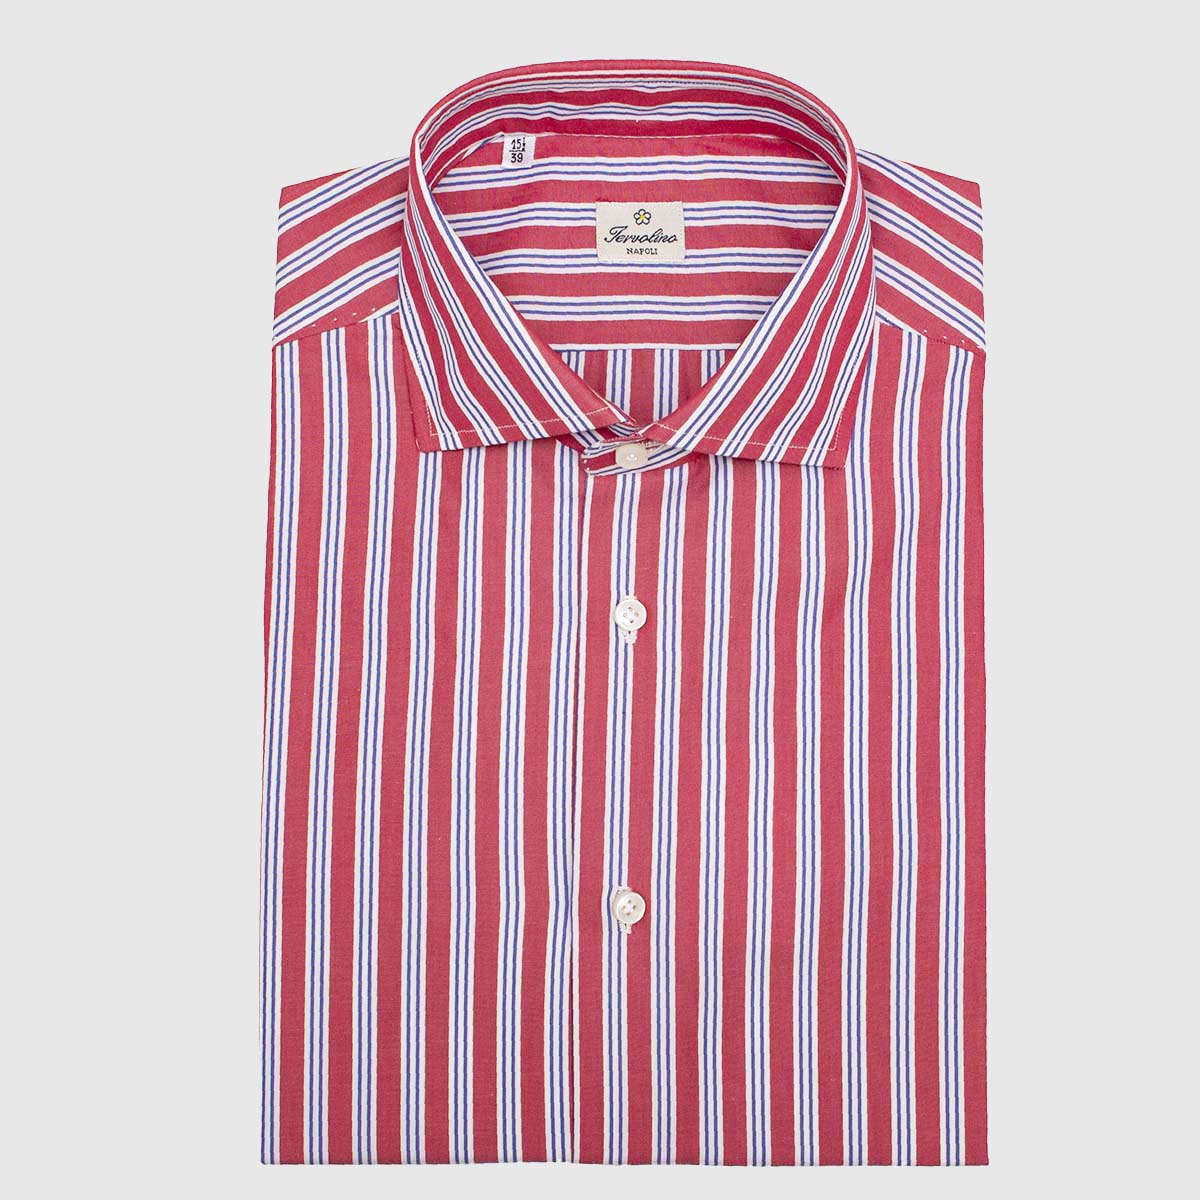 100% red and white striped Cotton shirt made in 12 hand-made steps Sartoria Iervolino on sale 2022 2